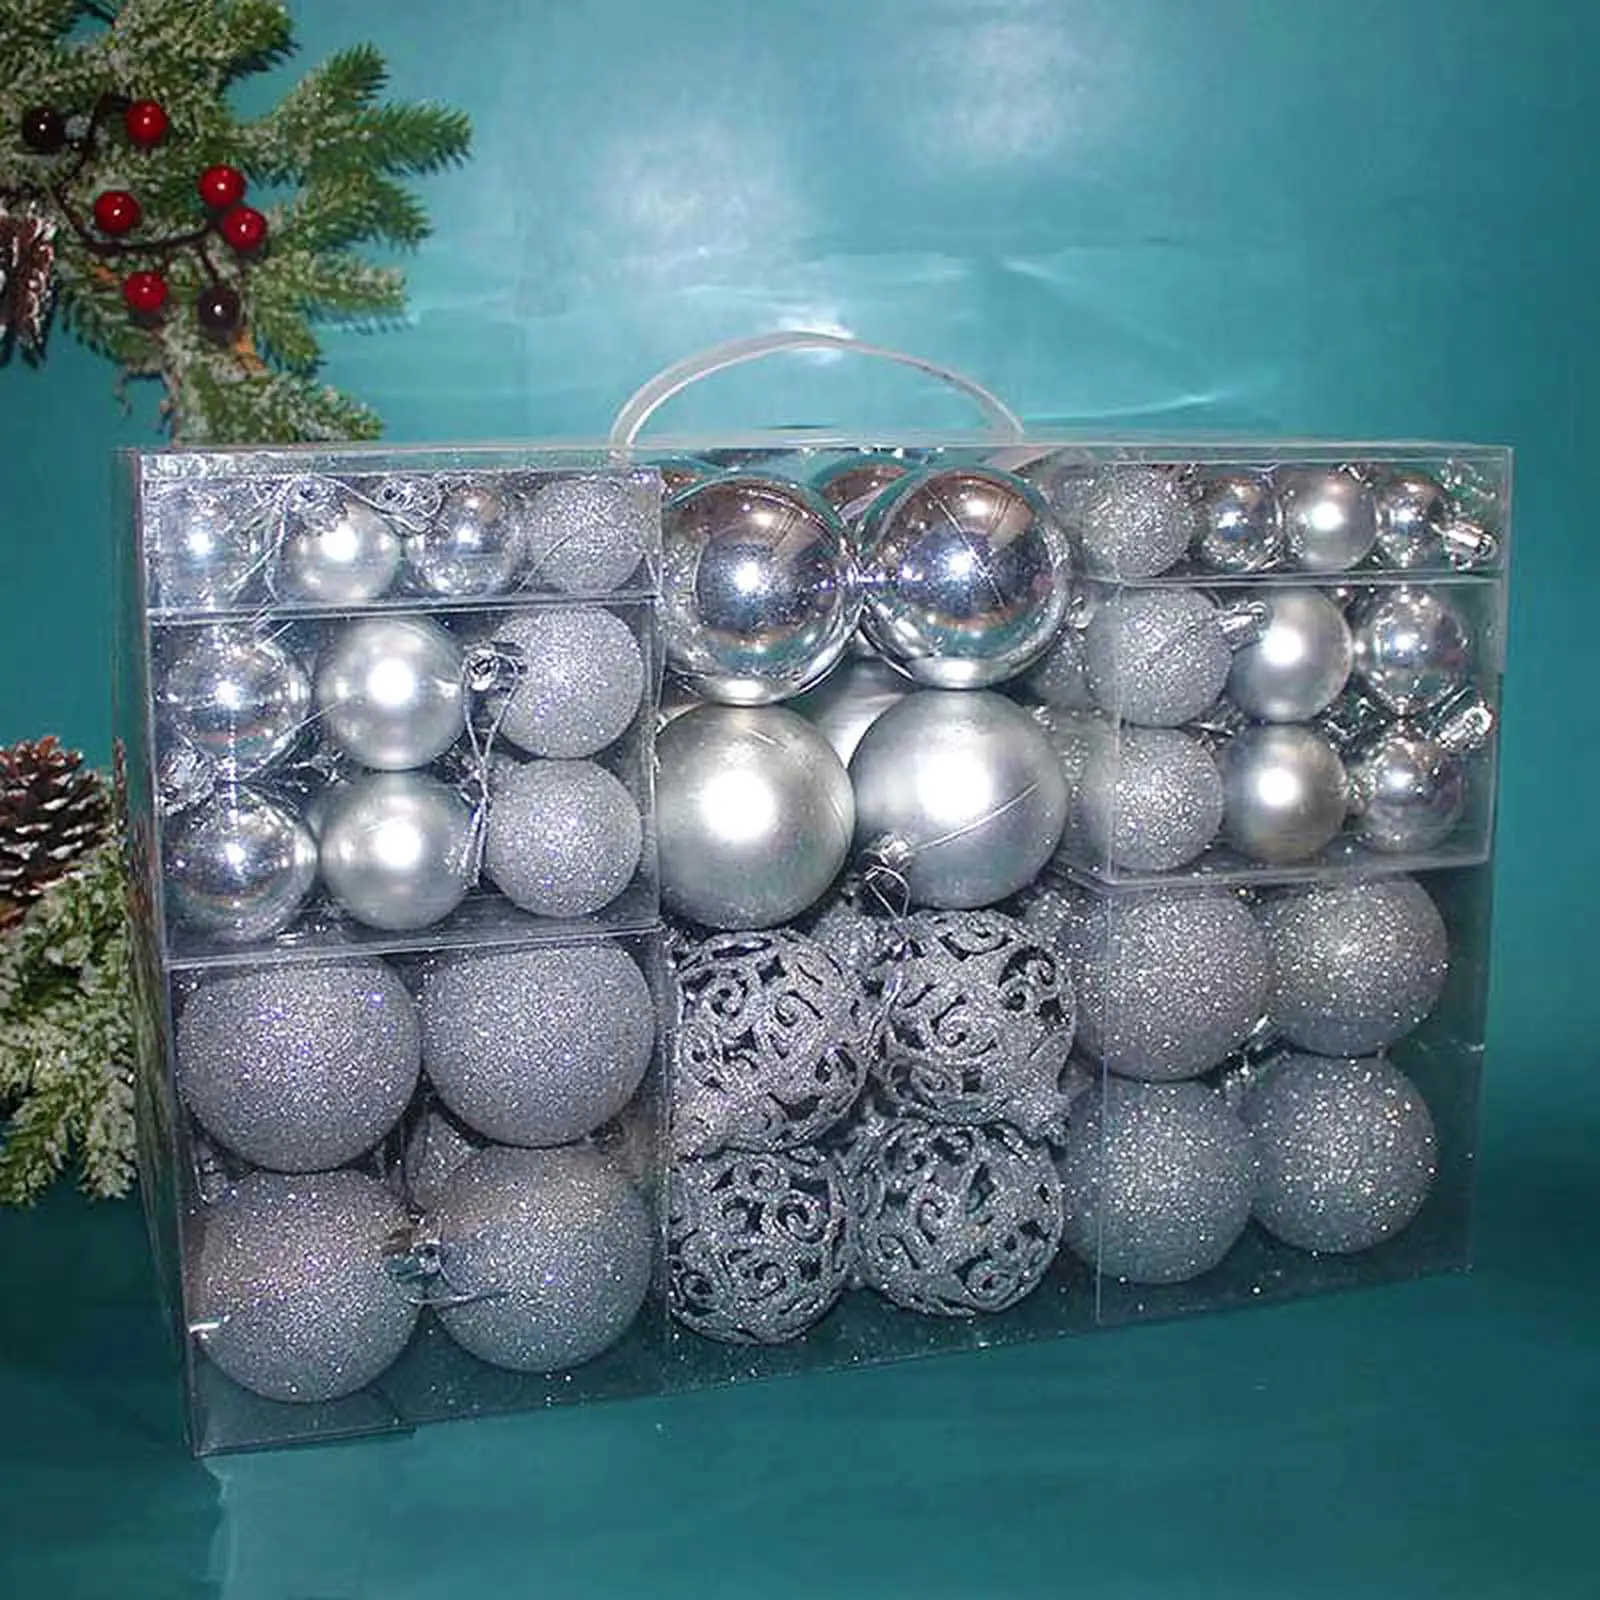 100 Pieces Christmas Tree Ornaments 3cm 4cm 6cm Shatterproof Hanging Balls with Lanyard for Party Indoor Home Decoration